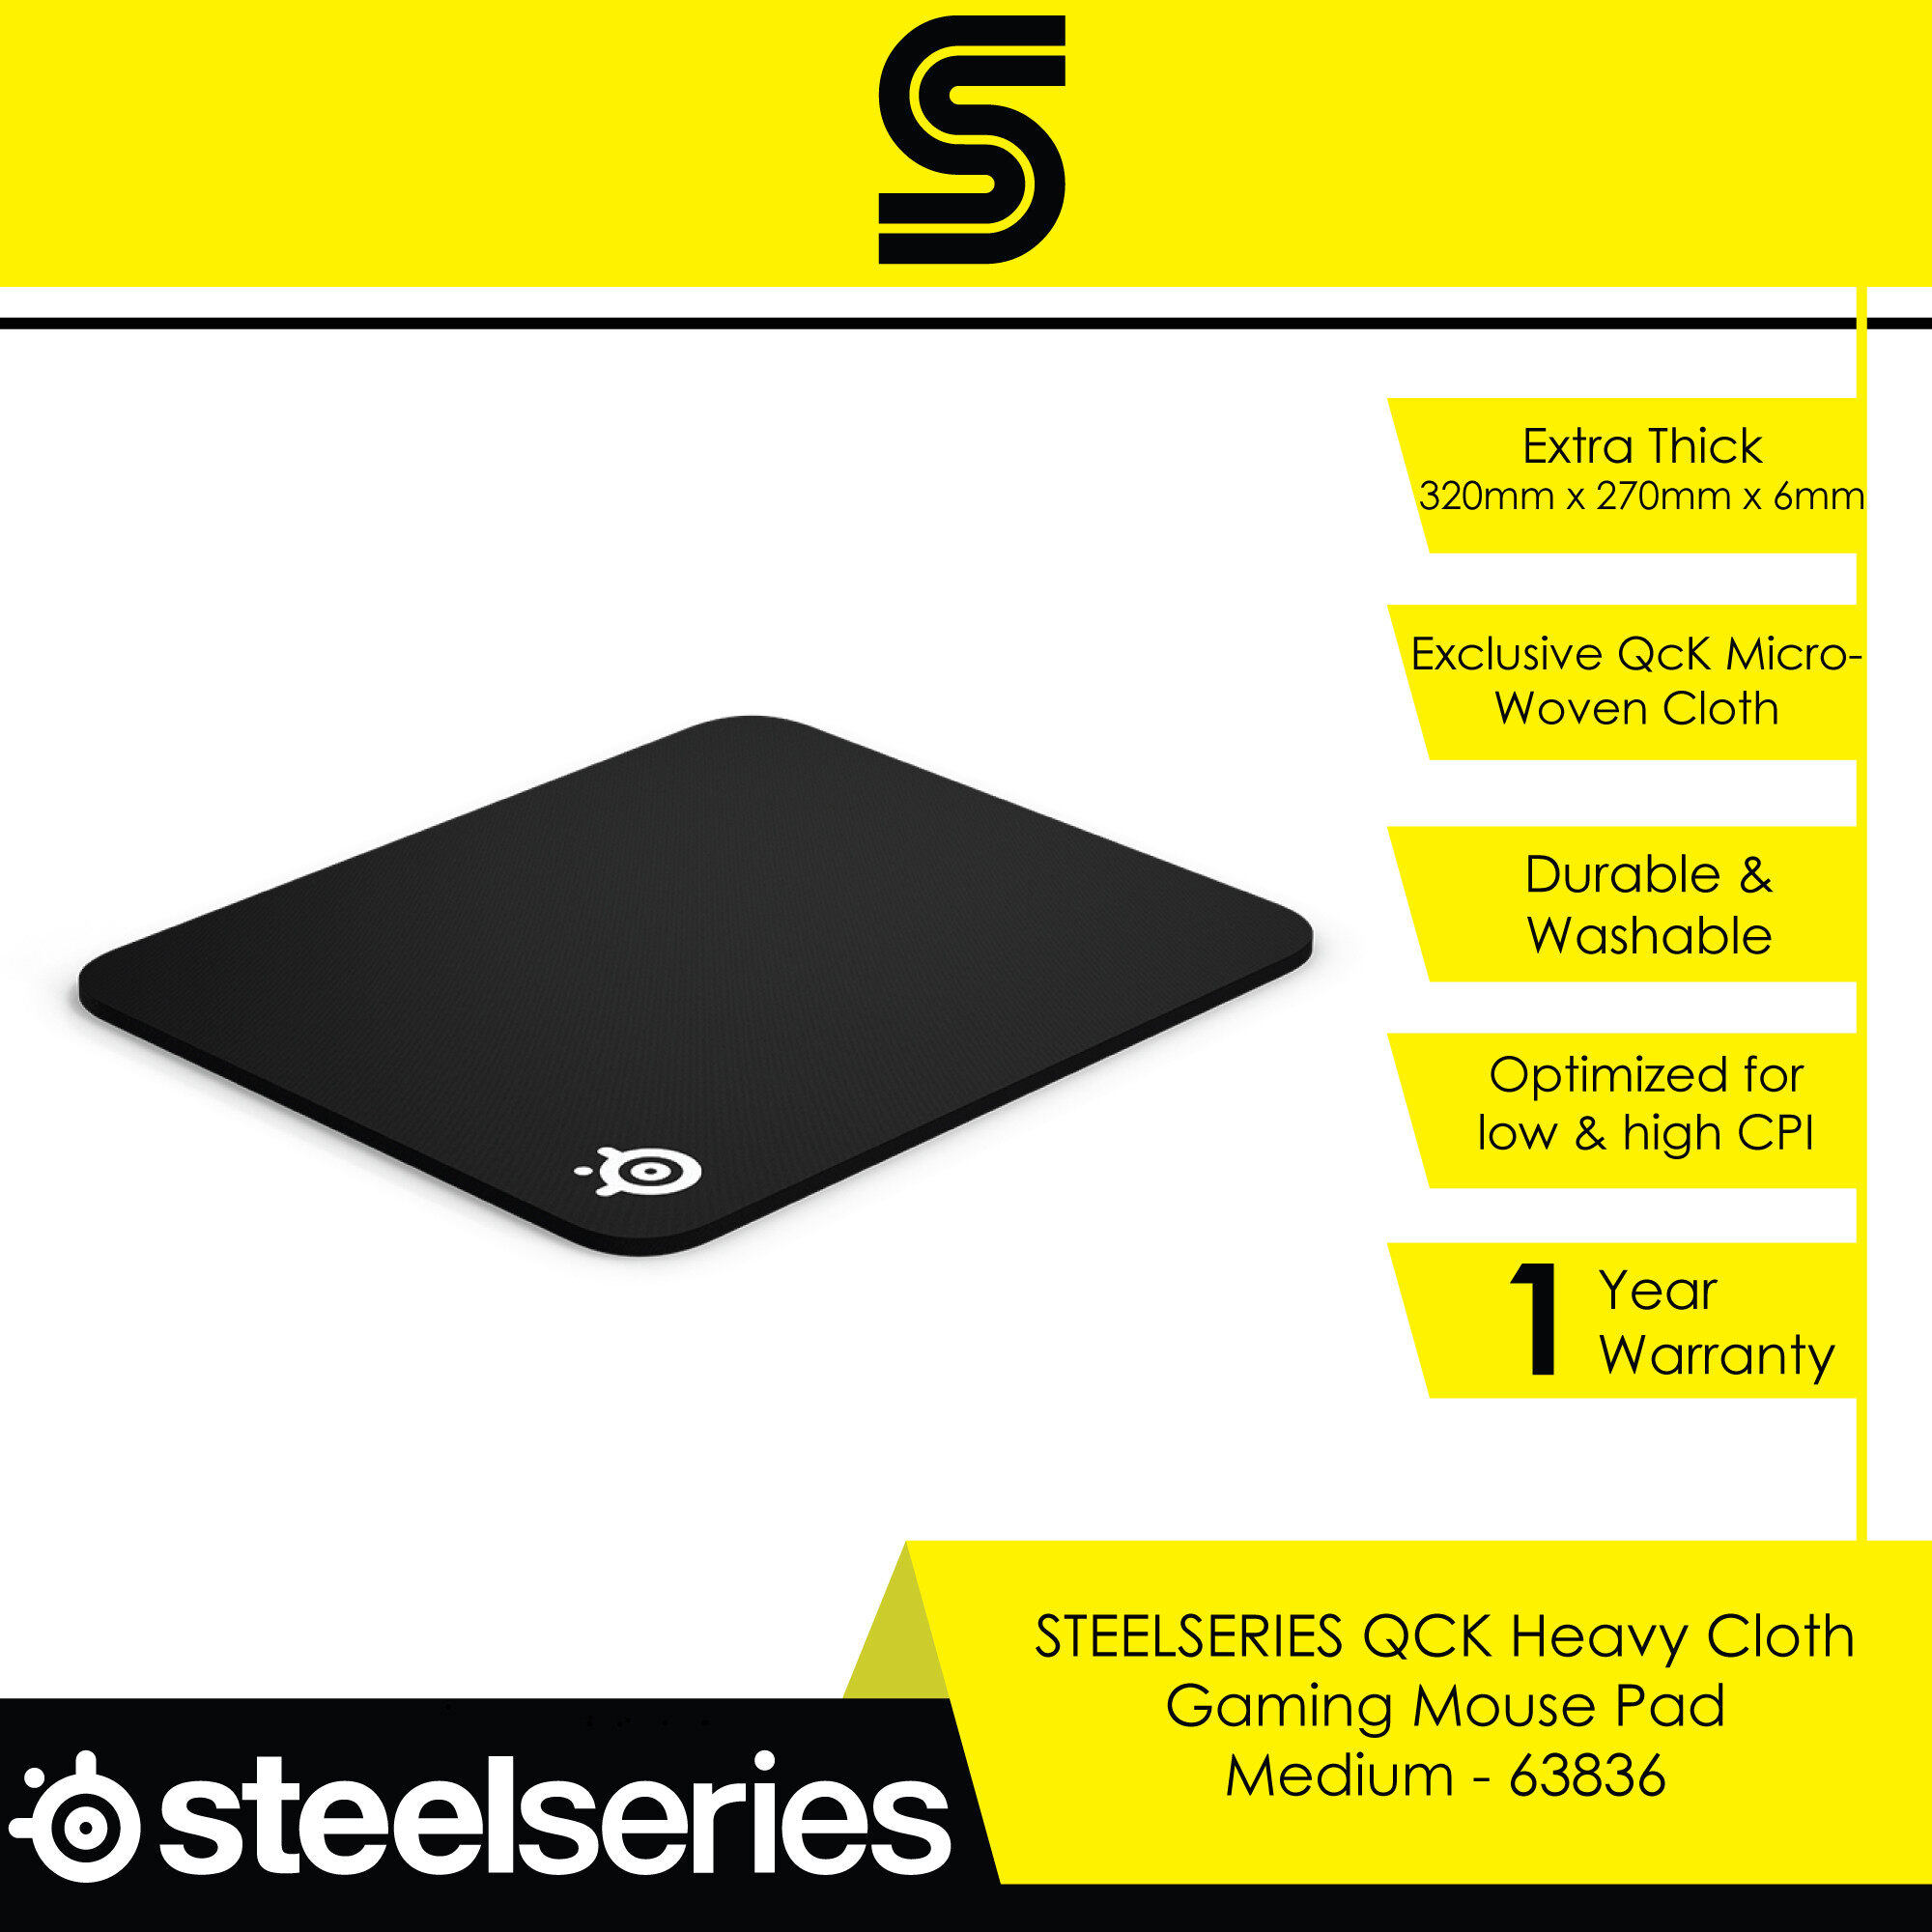 Steelseries QCK HEAVY Cloth Gaming Mouse Pad 2020 Edition - Medium - 63836